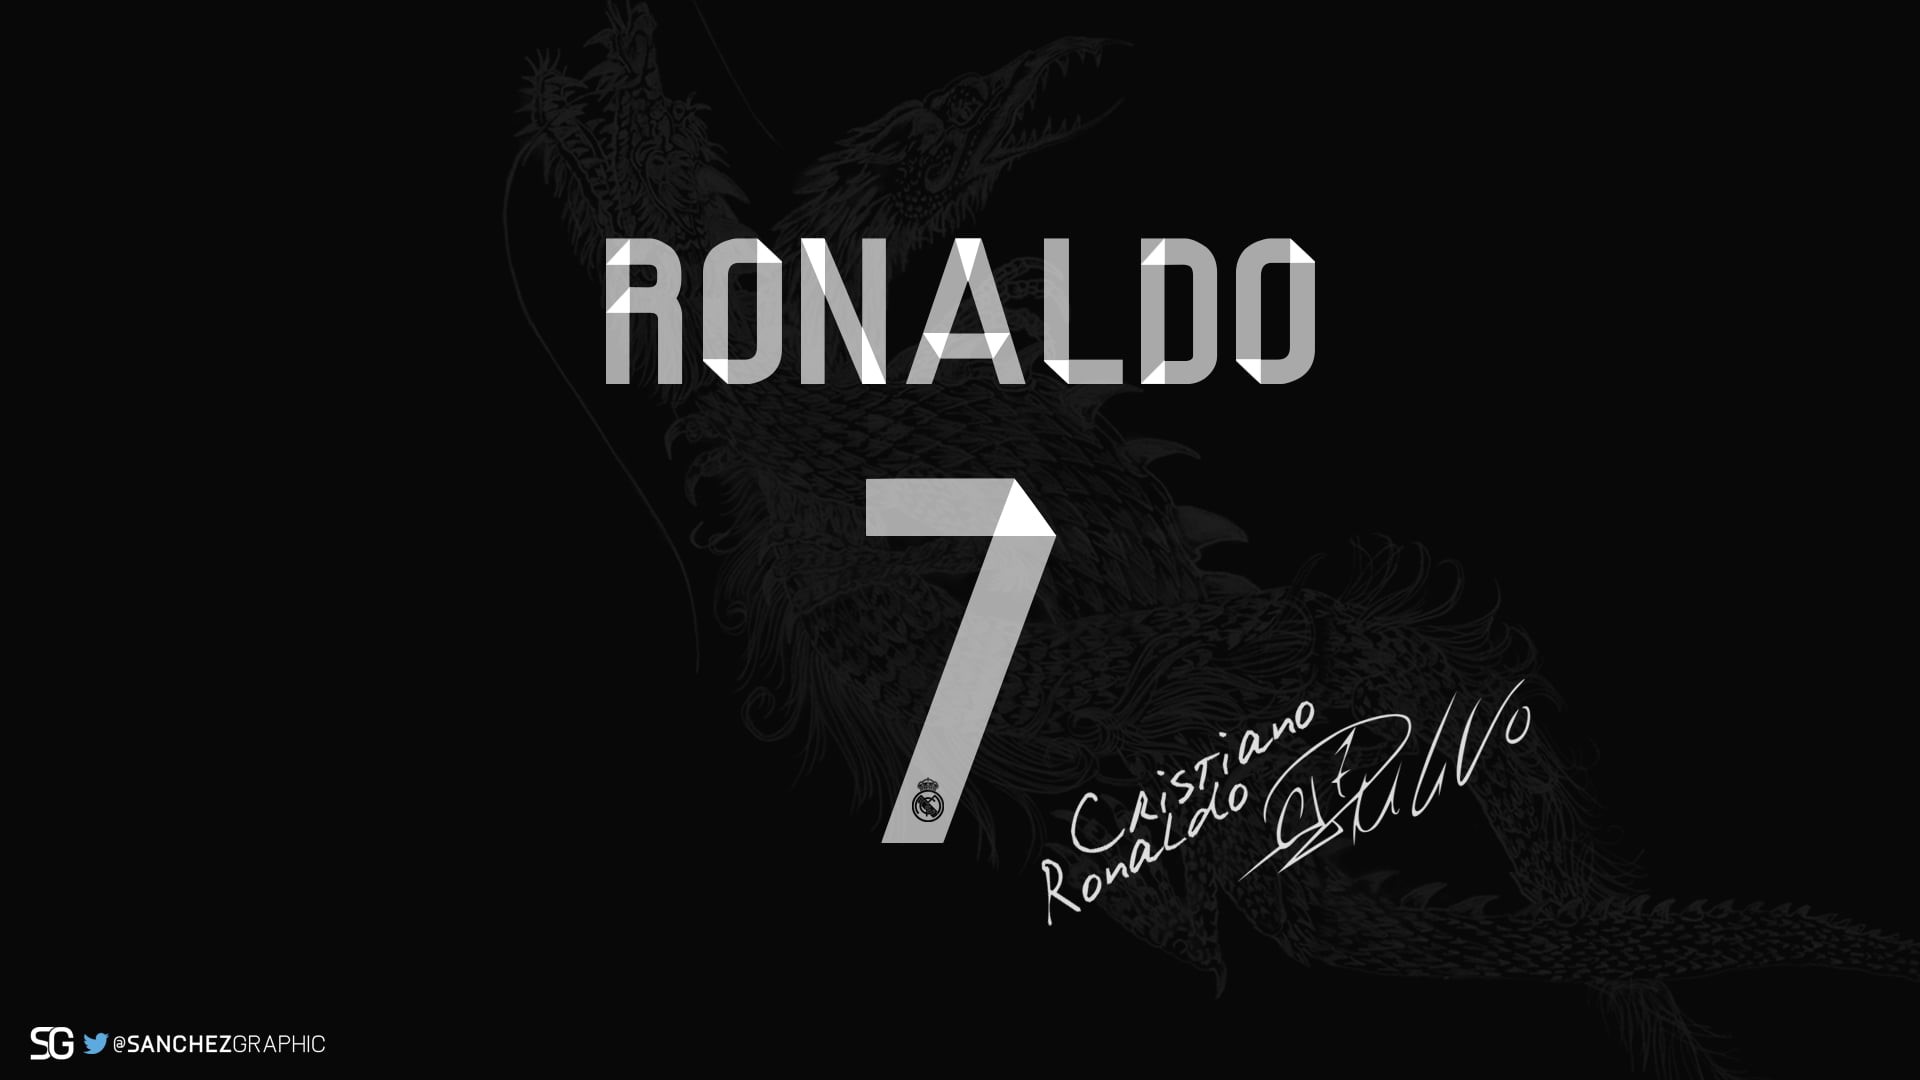 Wallpaper / capital letter, western script, illustration, Cristiano Ronaldo, vector, ronaldo, business, 1080P, numbers, symbol, letter, paper, abstract, celebration free download